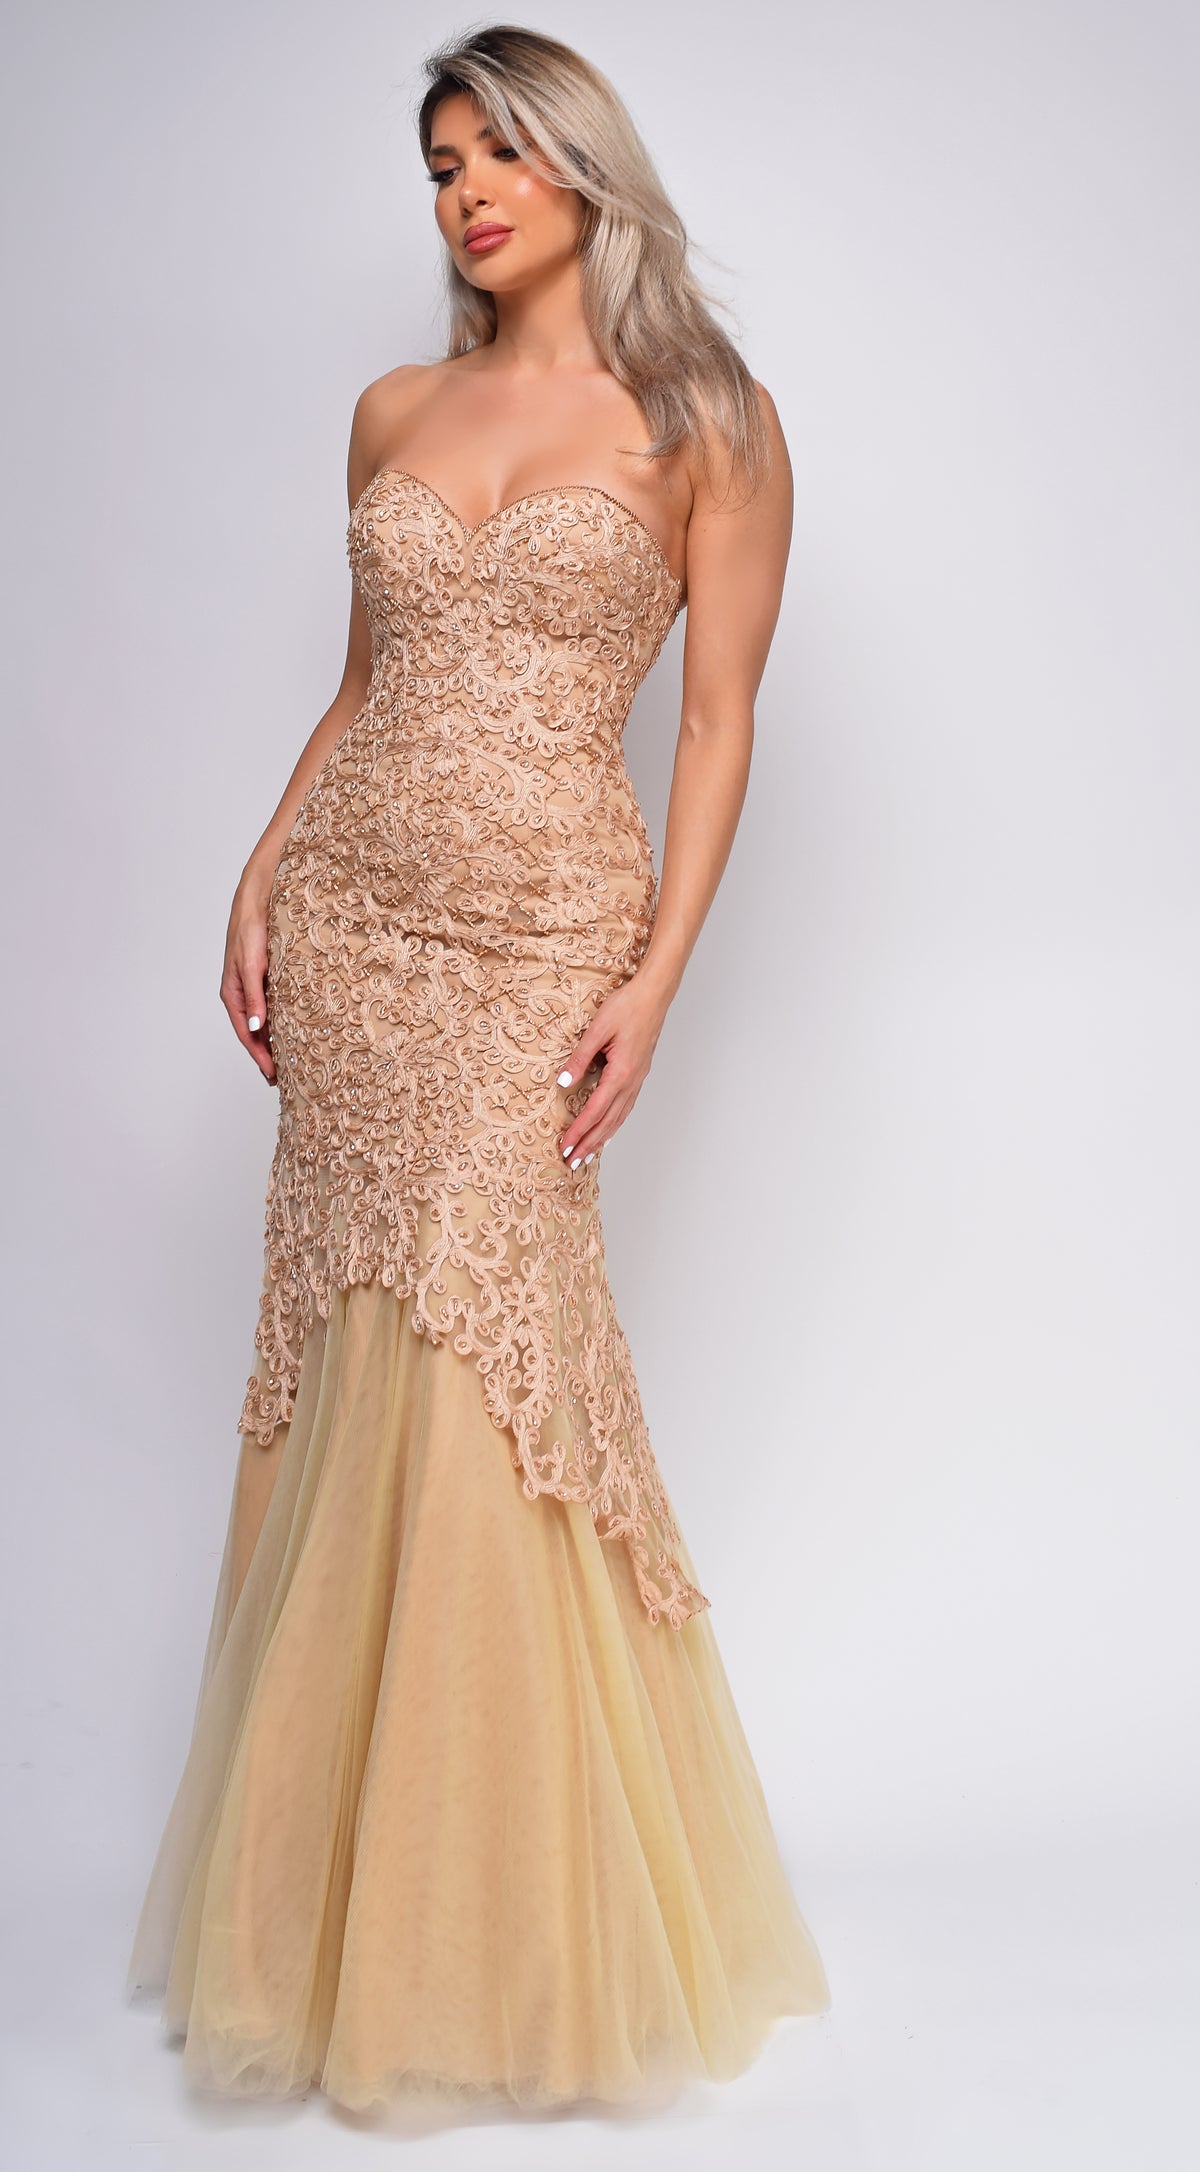 Kira Gold Sweetheart Neck Beaded Lace Gown